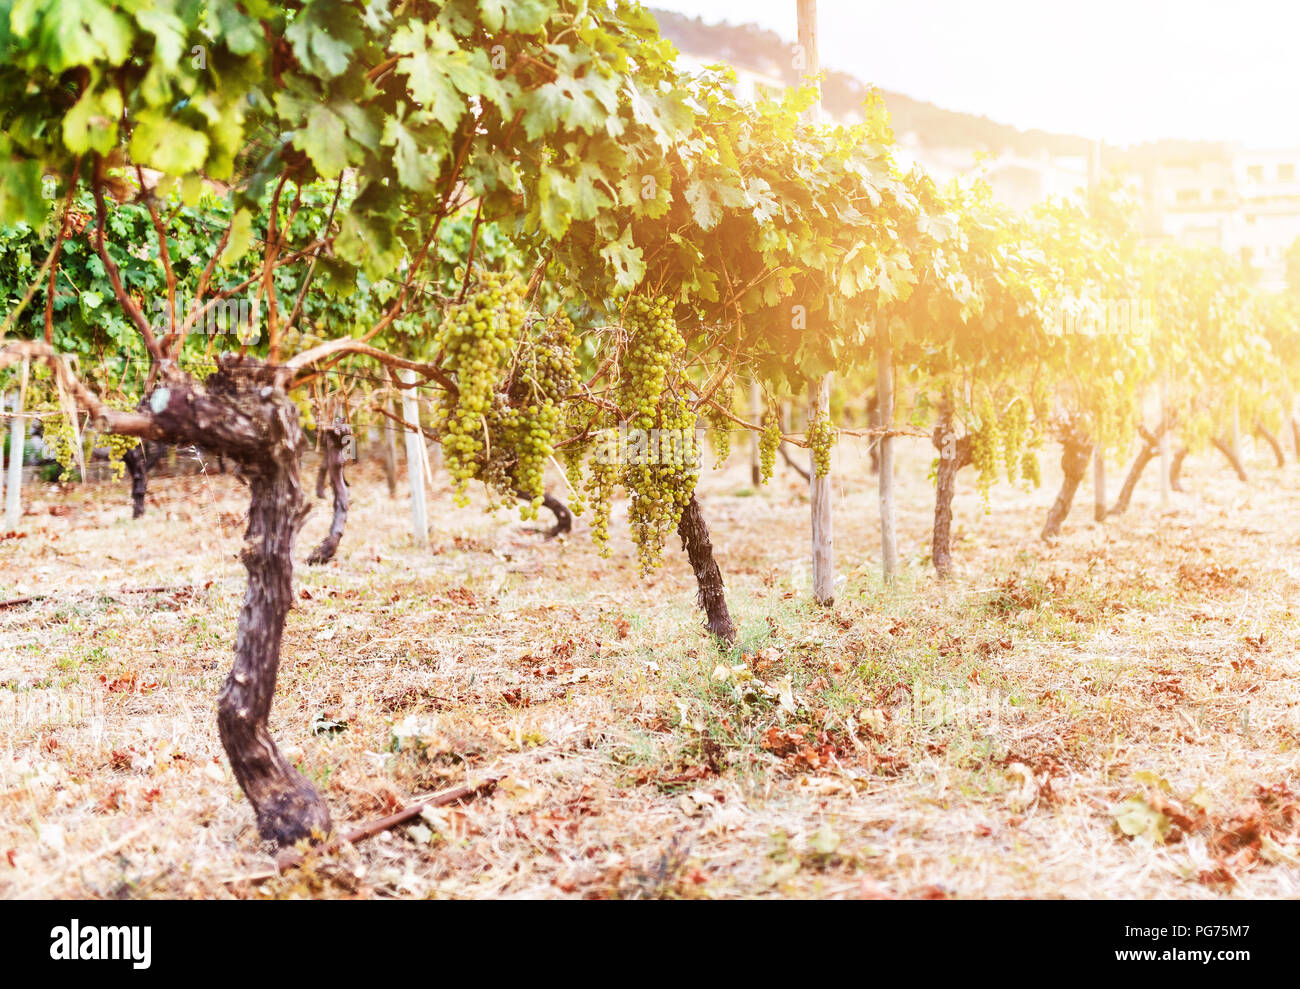 bunch of grapes hanging on vine in golden sunlight Stock Photo